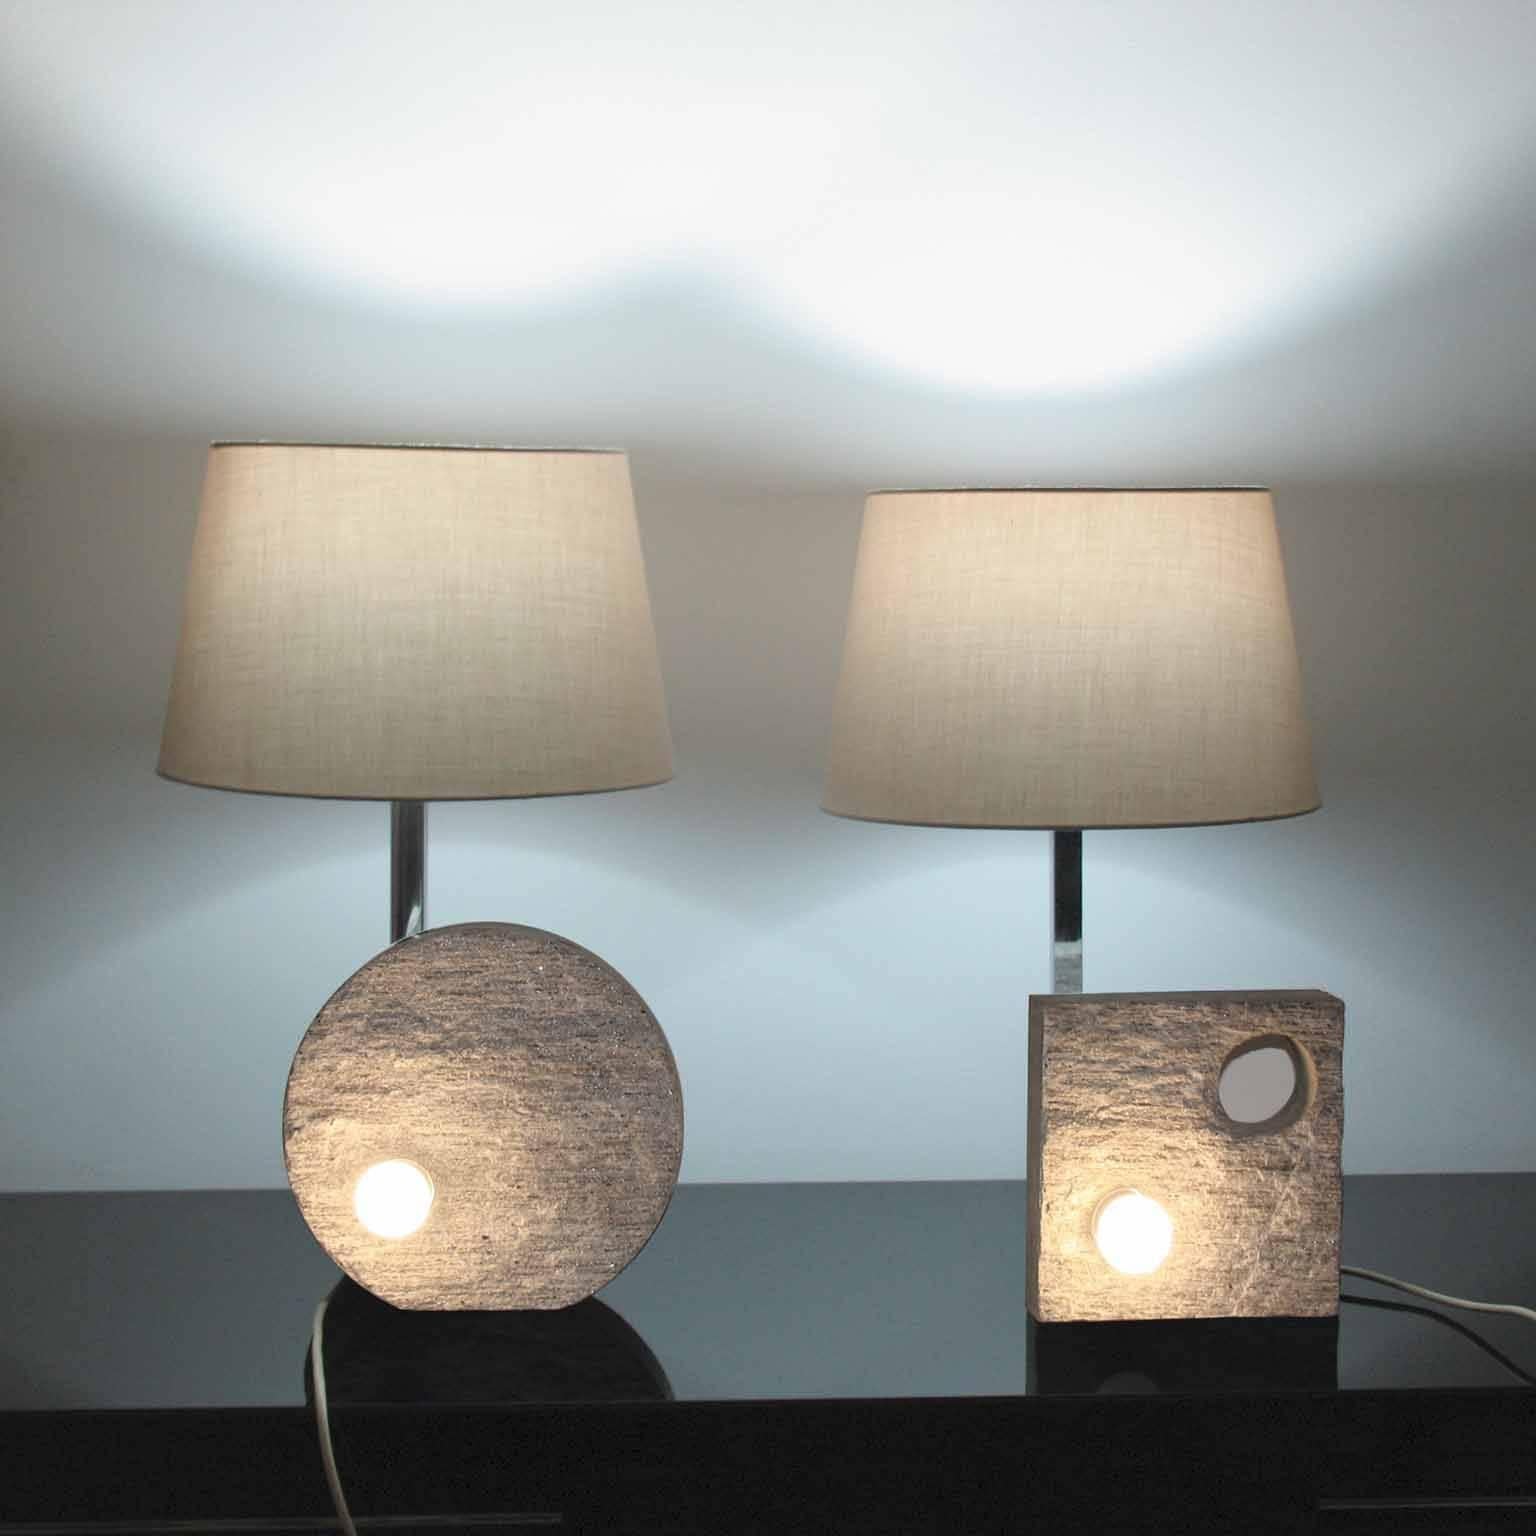 Stone (Portuguese beige granite) bases, hand-carved, with chromed metal details, geometrically shaped.
Double illuminating source, one in front, decorative, one to the top.
Double phase illuminating, can be lit separately the top, the front and